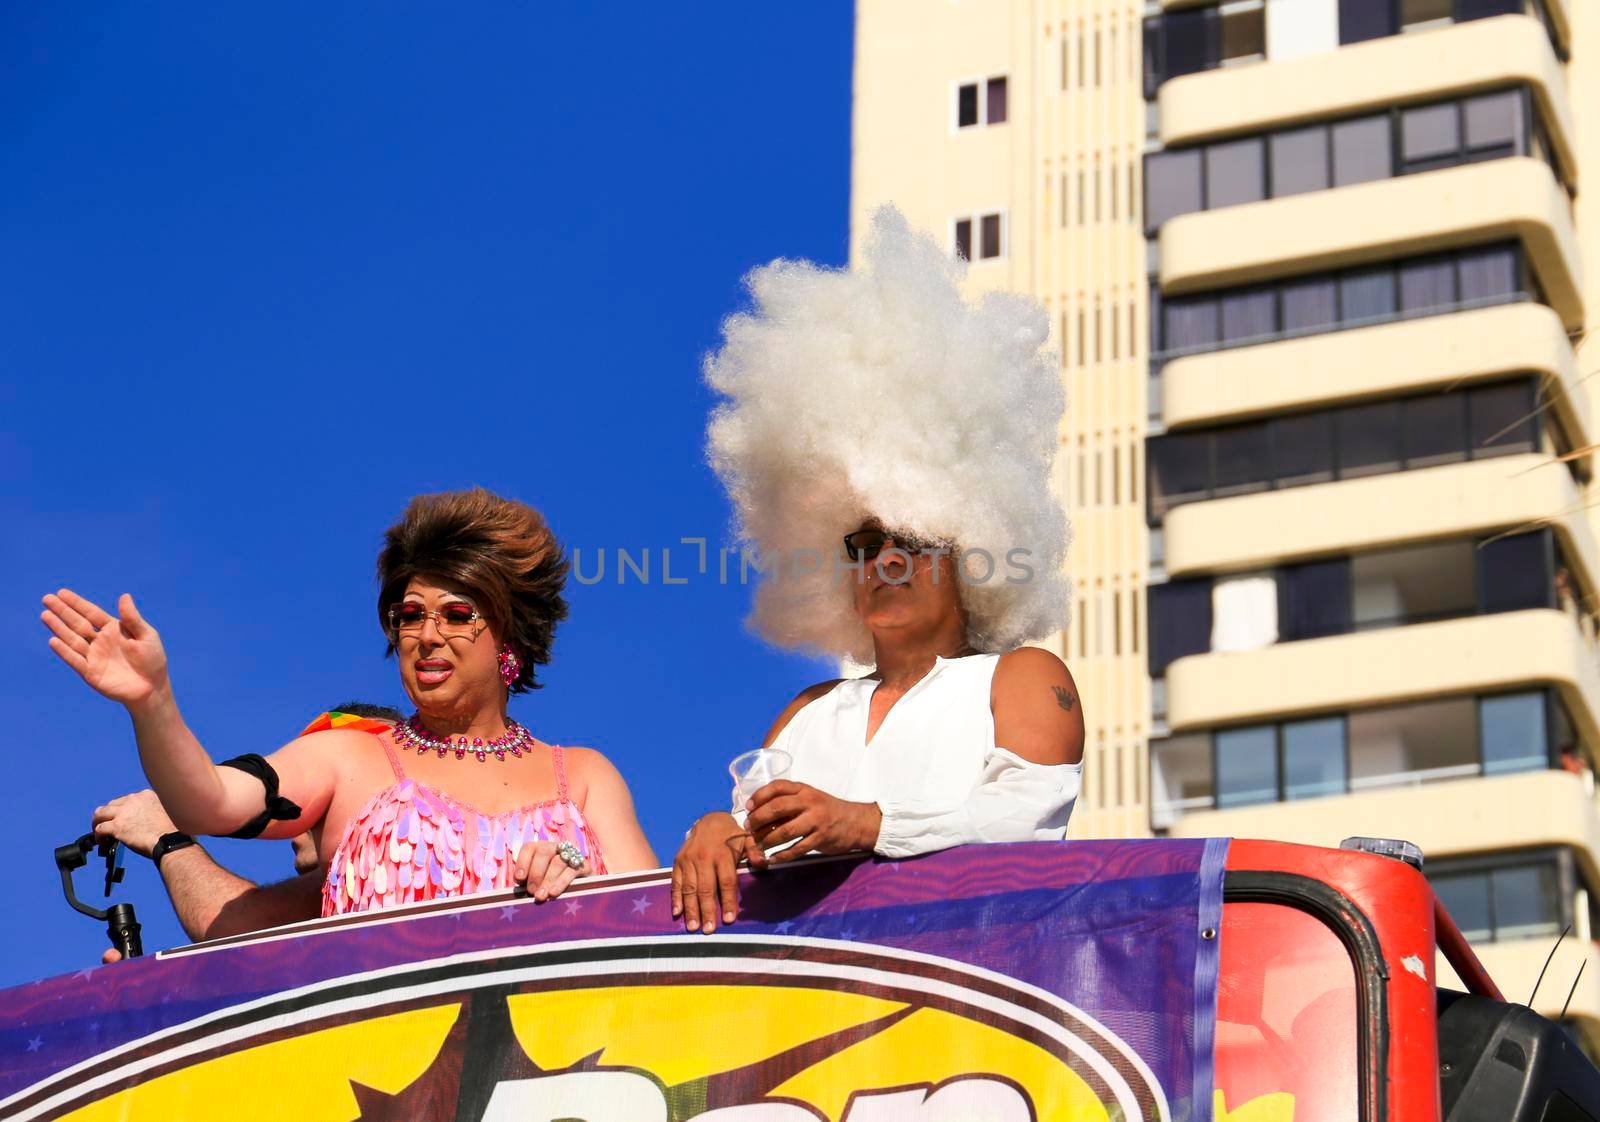 People dancing and having fun at the Gay Pride Parade in Benidorm by soniabonet